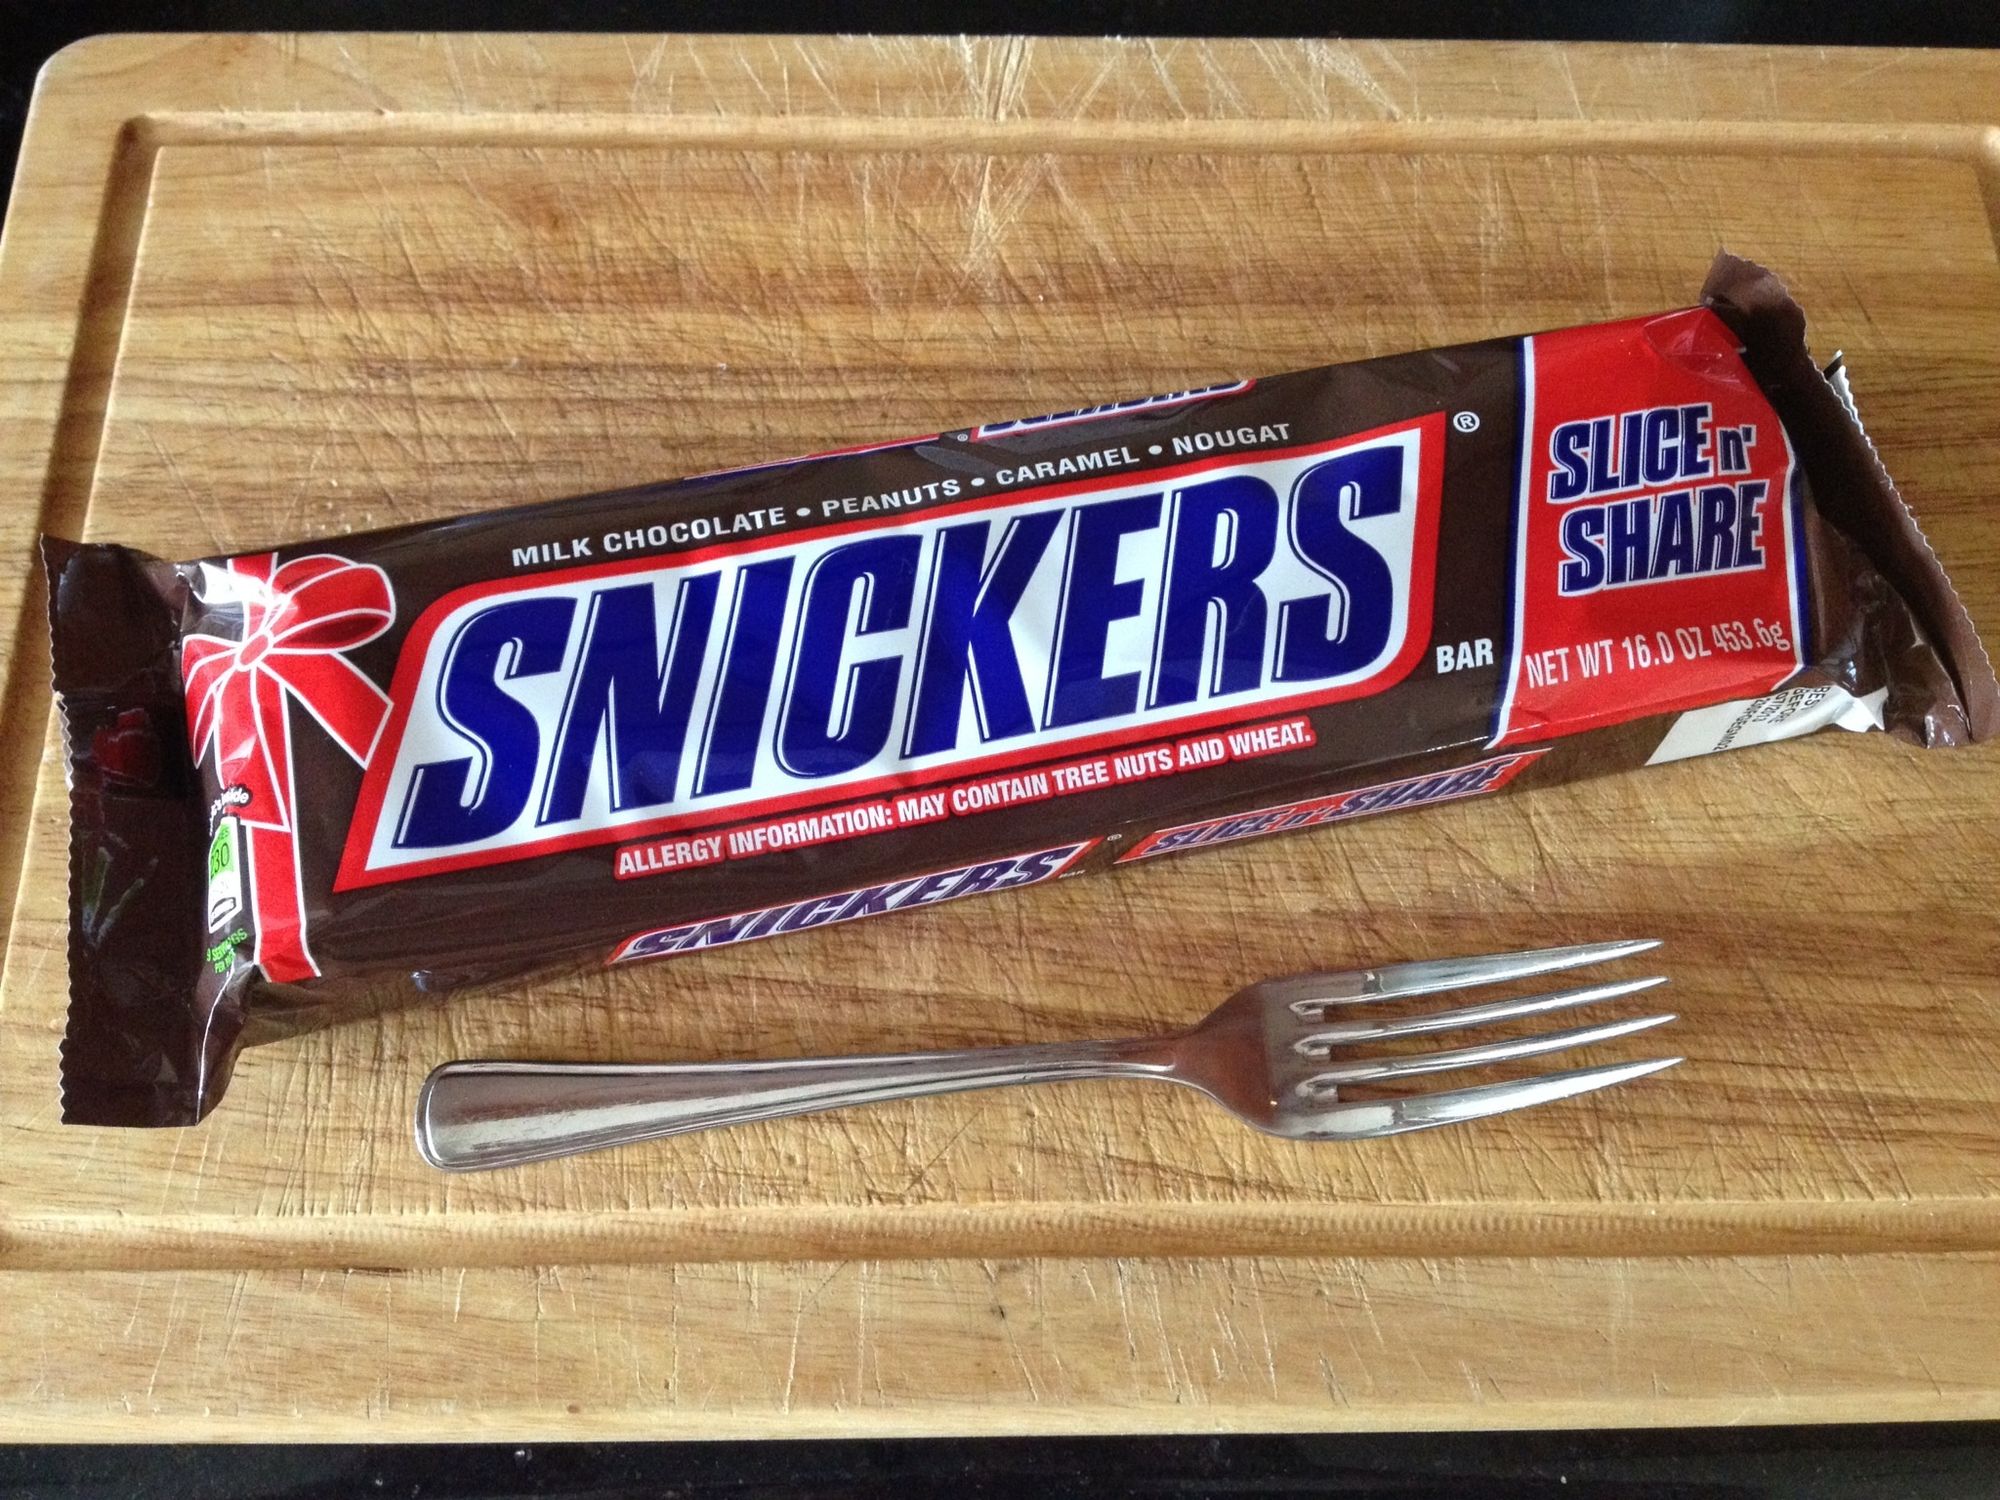 Snickers anyone?